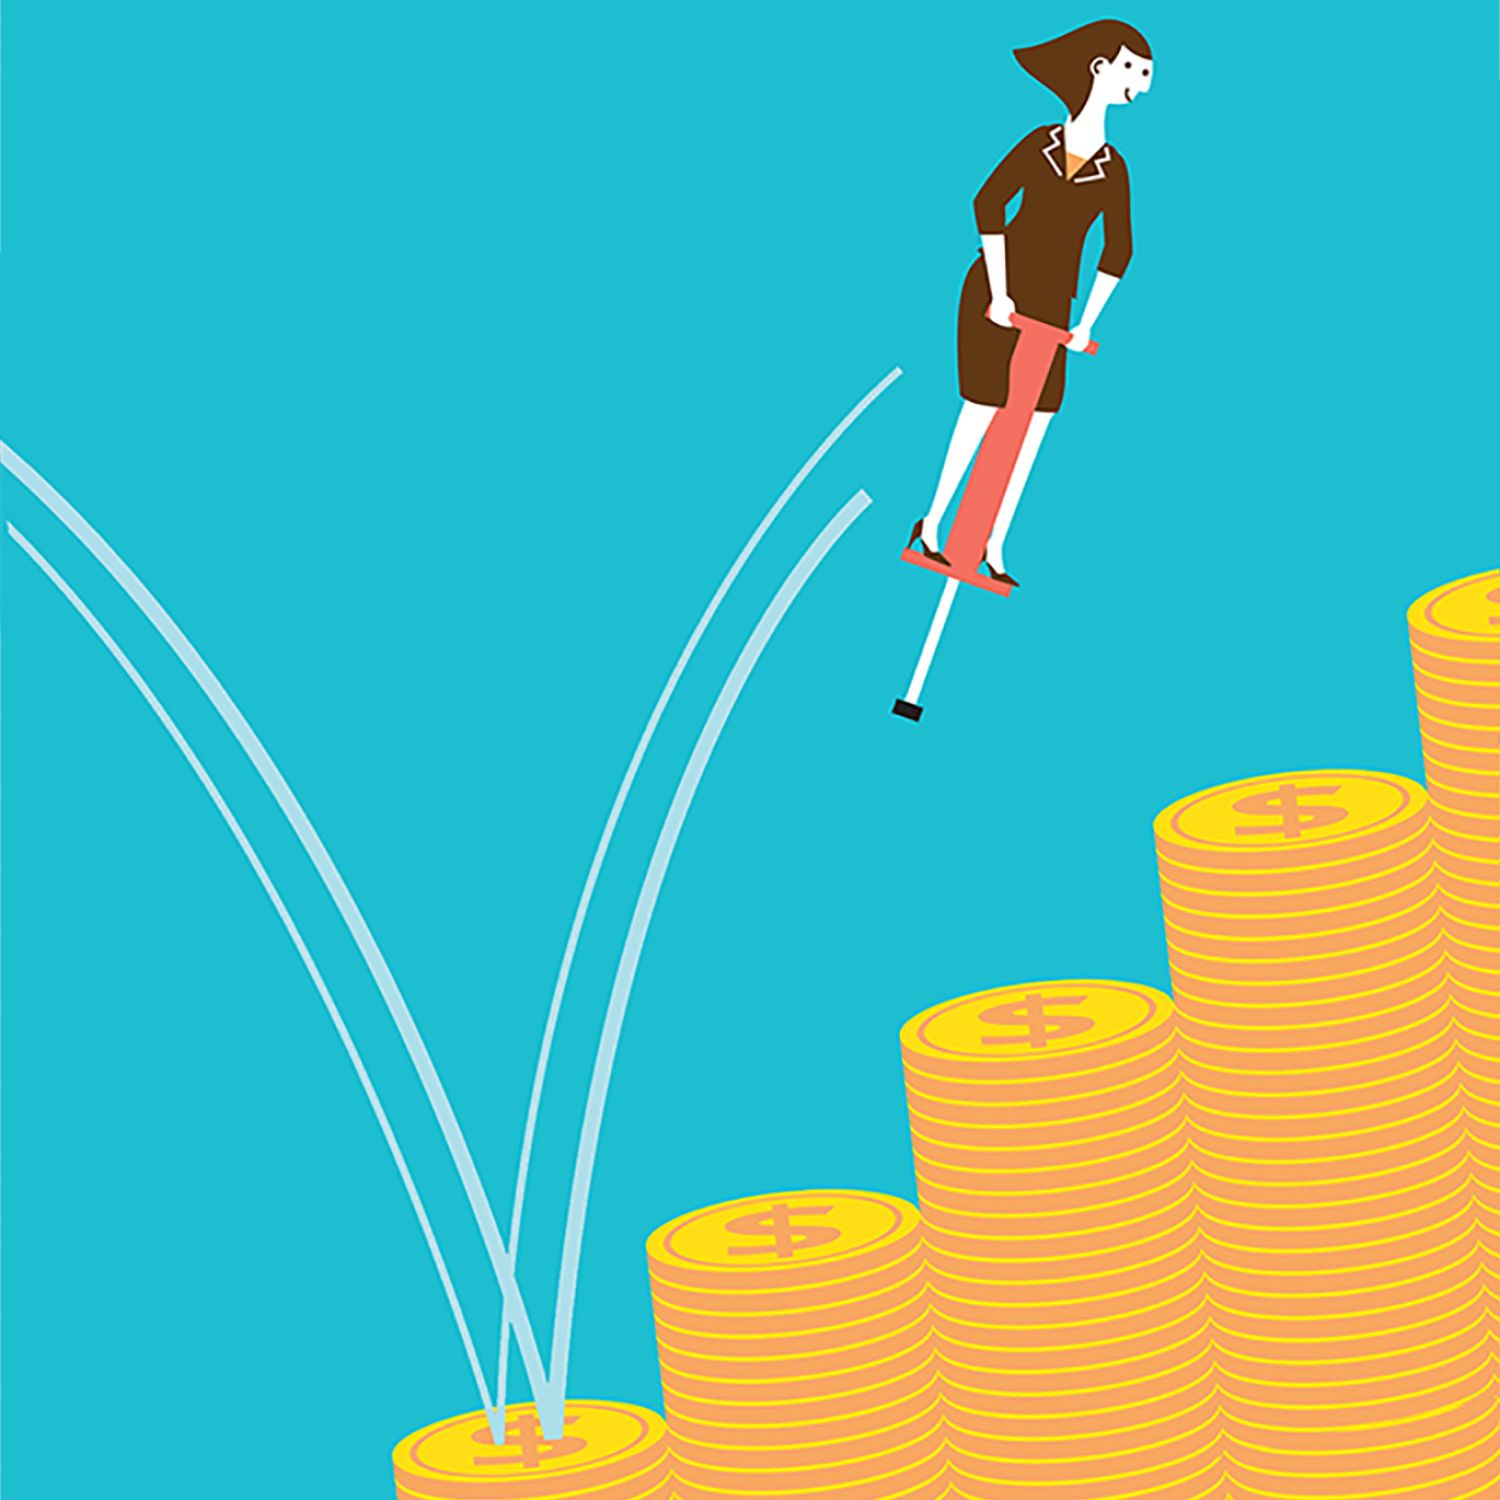 Illustration of woman on pogo stick bouncing on money piles